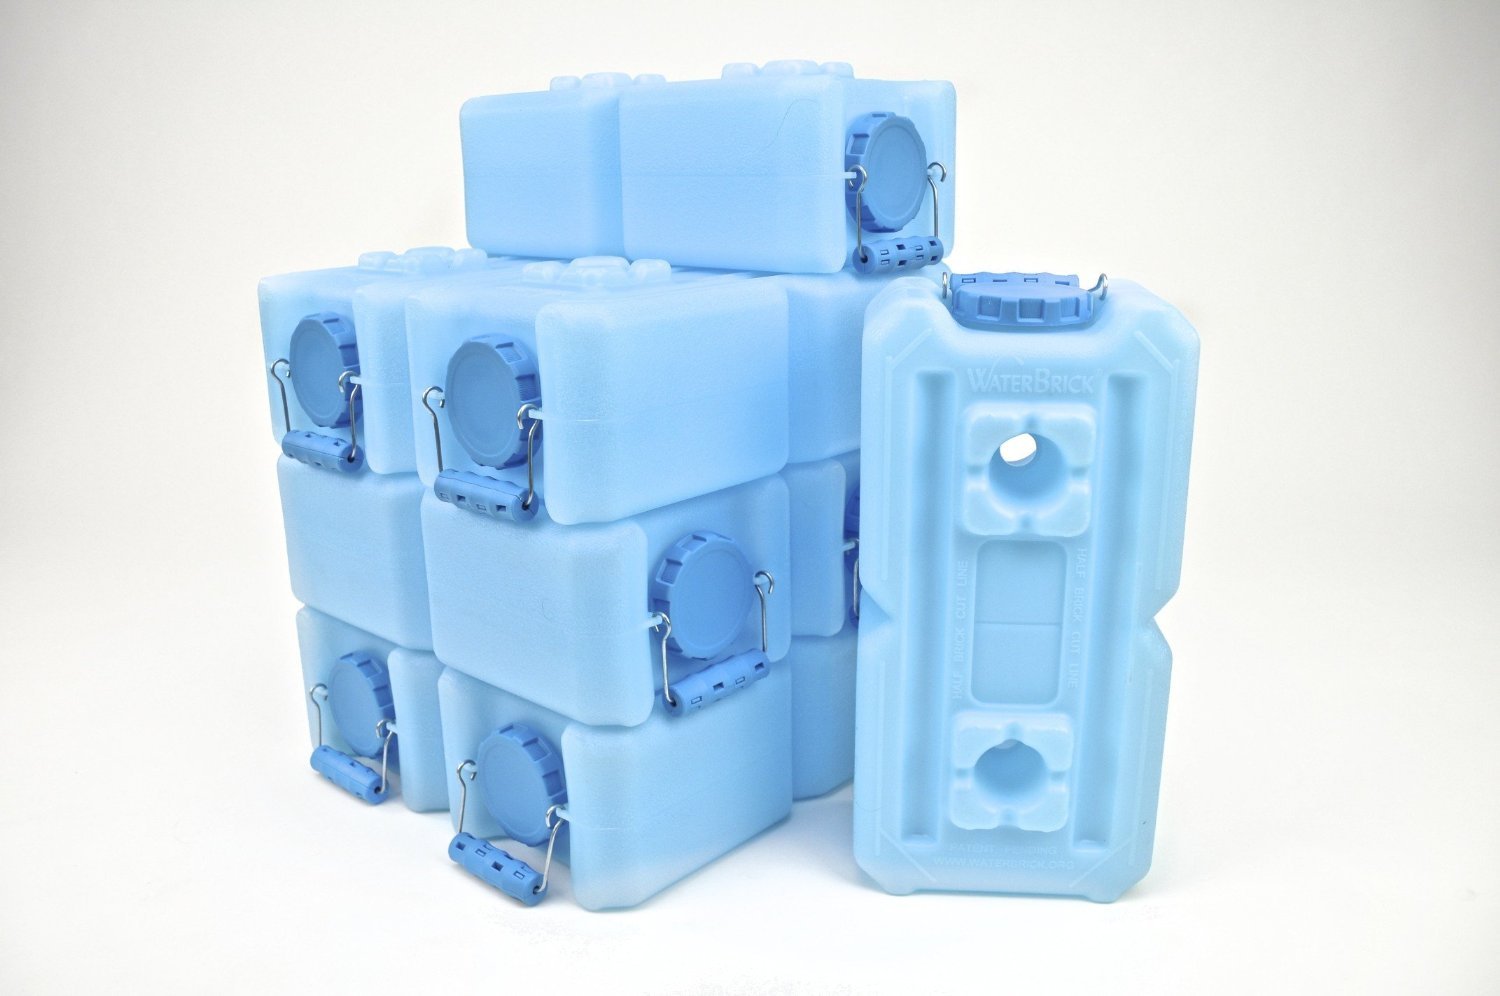 Water Storage Containers – WaterBrick – 8 Pack Blue